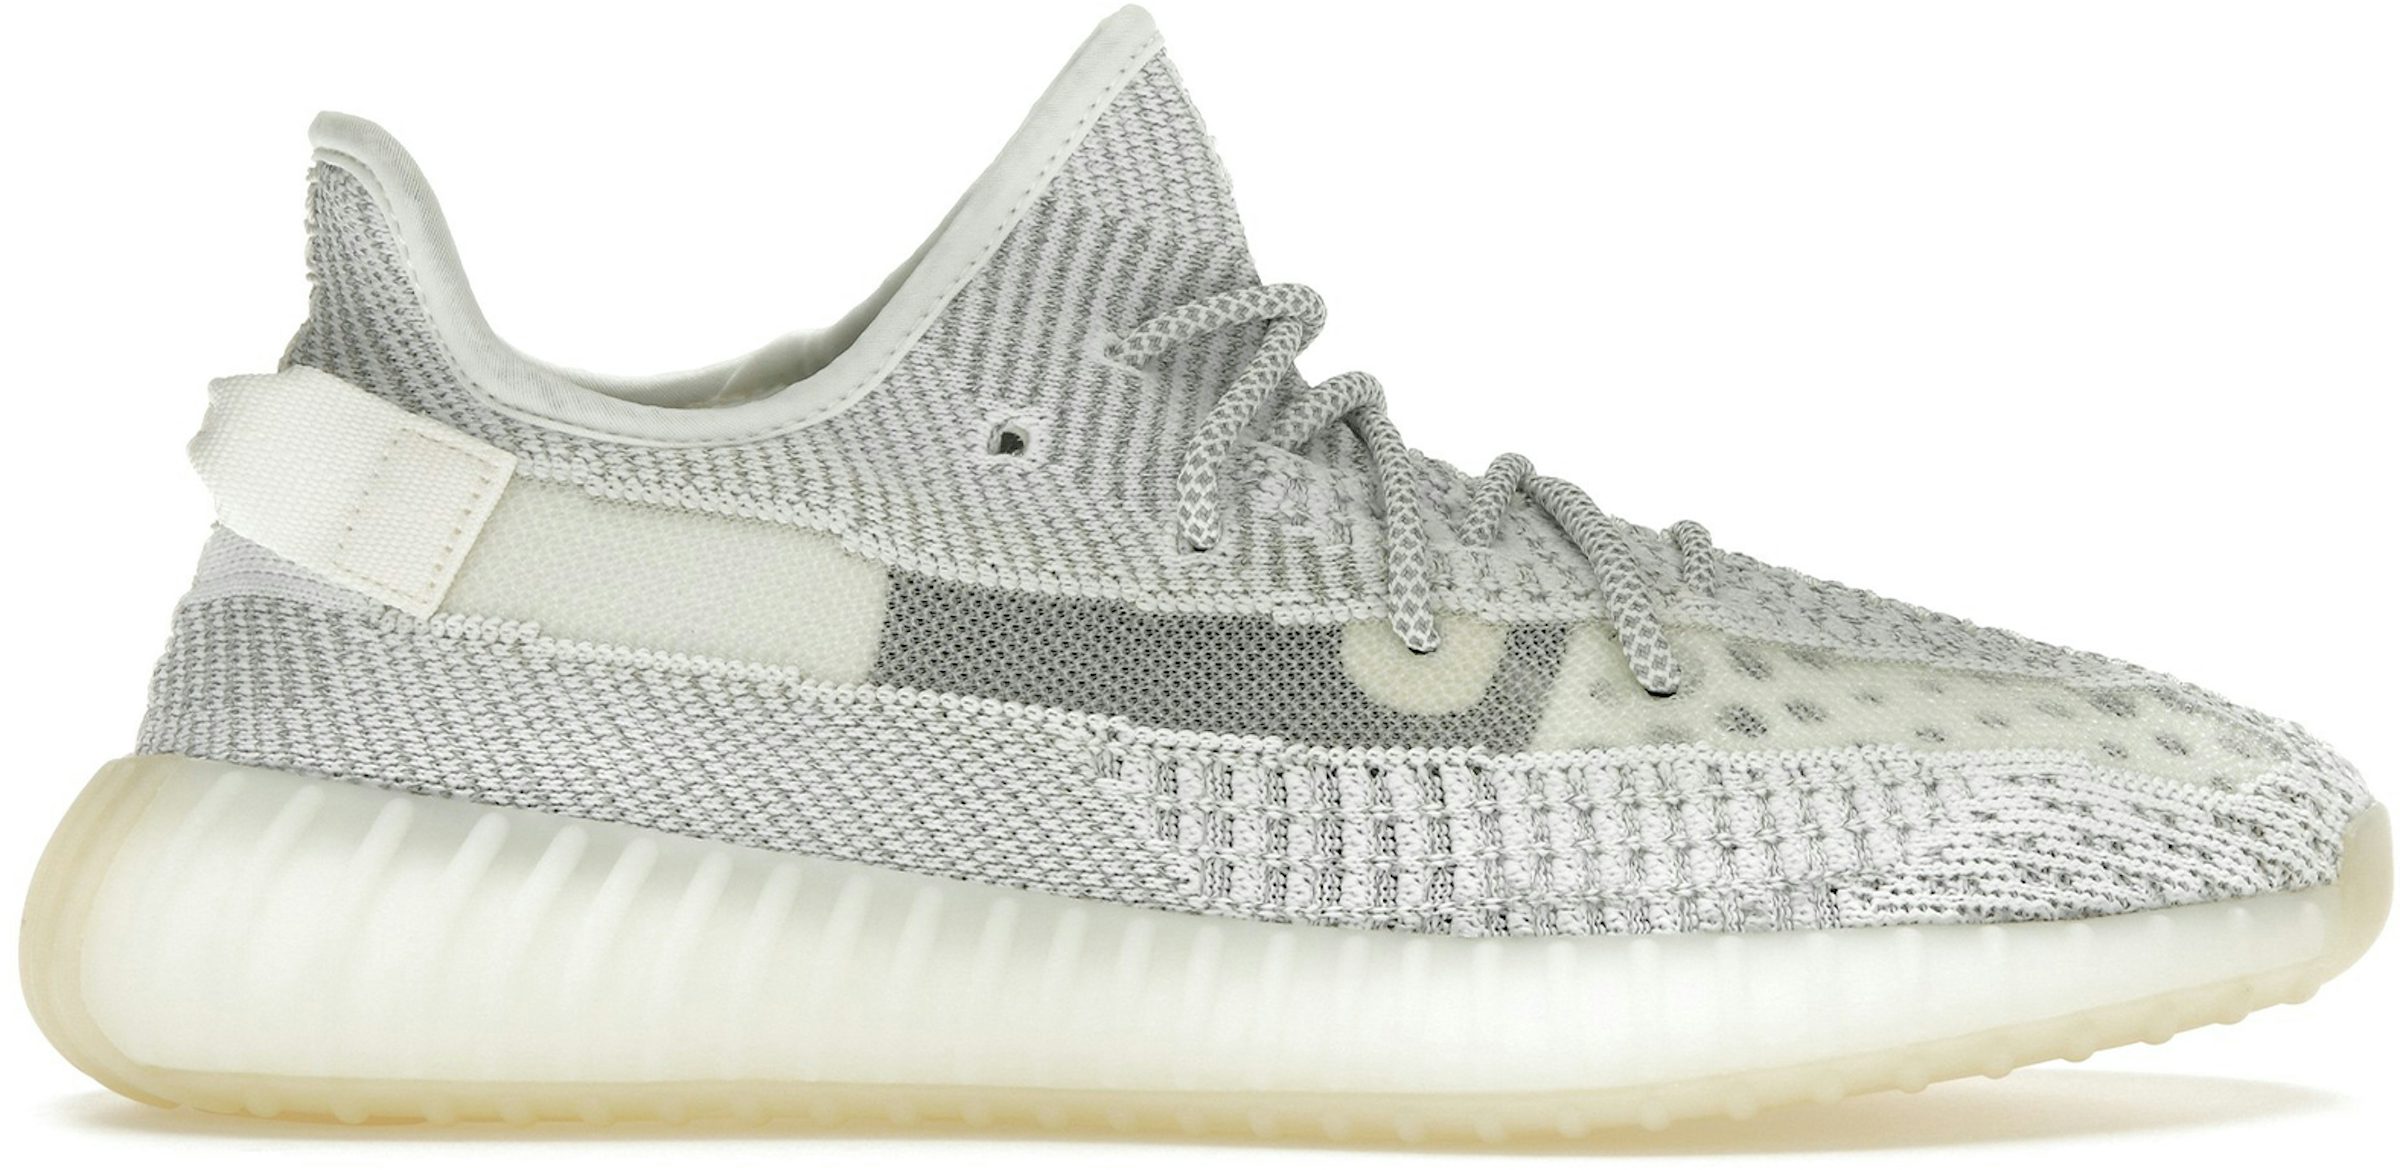 Yeezy Boost 350 V2 Static - Non-Reflective 6.5